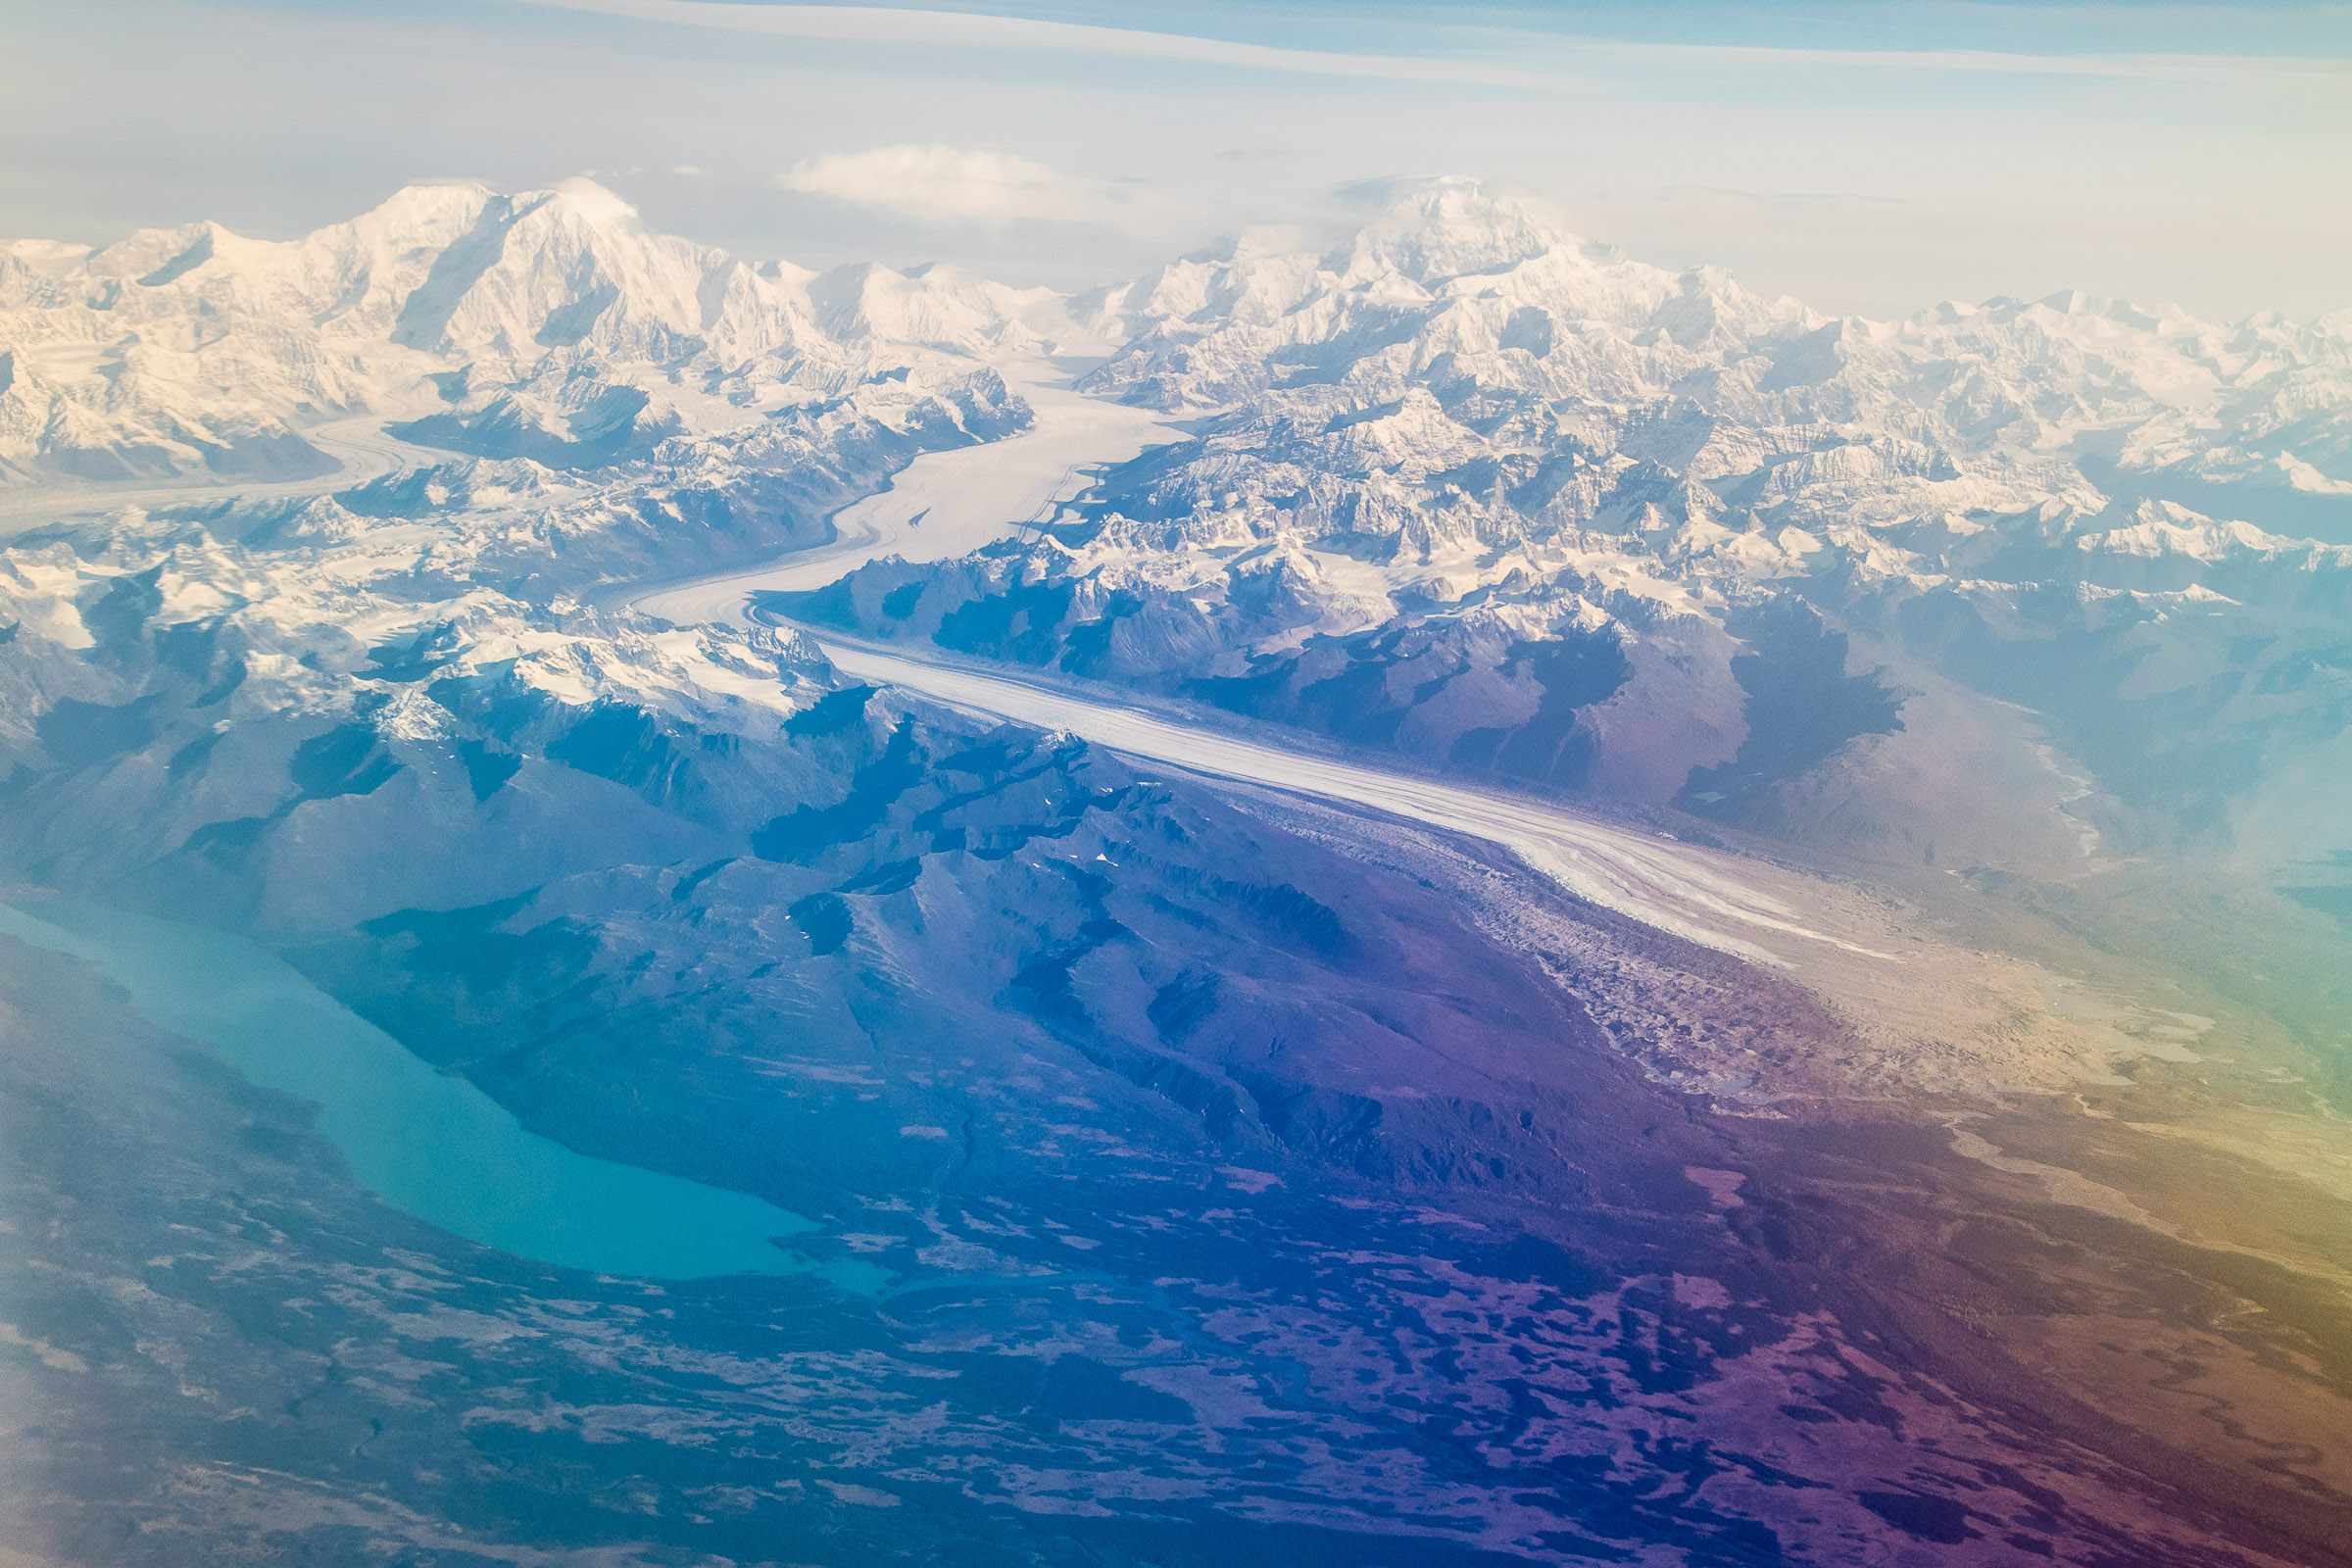 Mt Foraker (left), Denali (right), Kahiltna Glacier, and Chelatna Lake, the outlet of which (Lake Creek) is known for great fishing and difficult floating. Viewed from a flight from Kotzebue to Anchorage. From Denali National Park in Alaska.